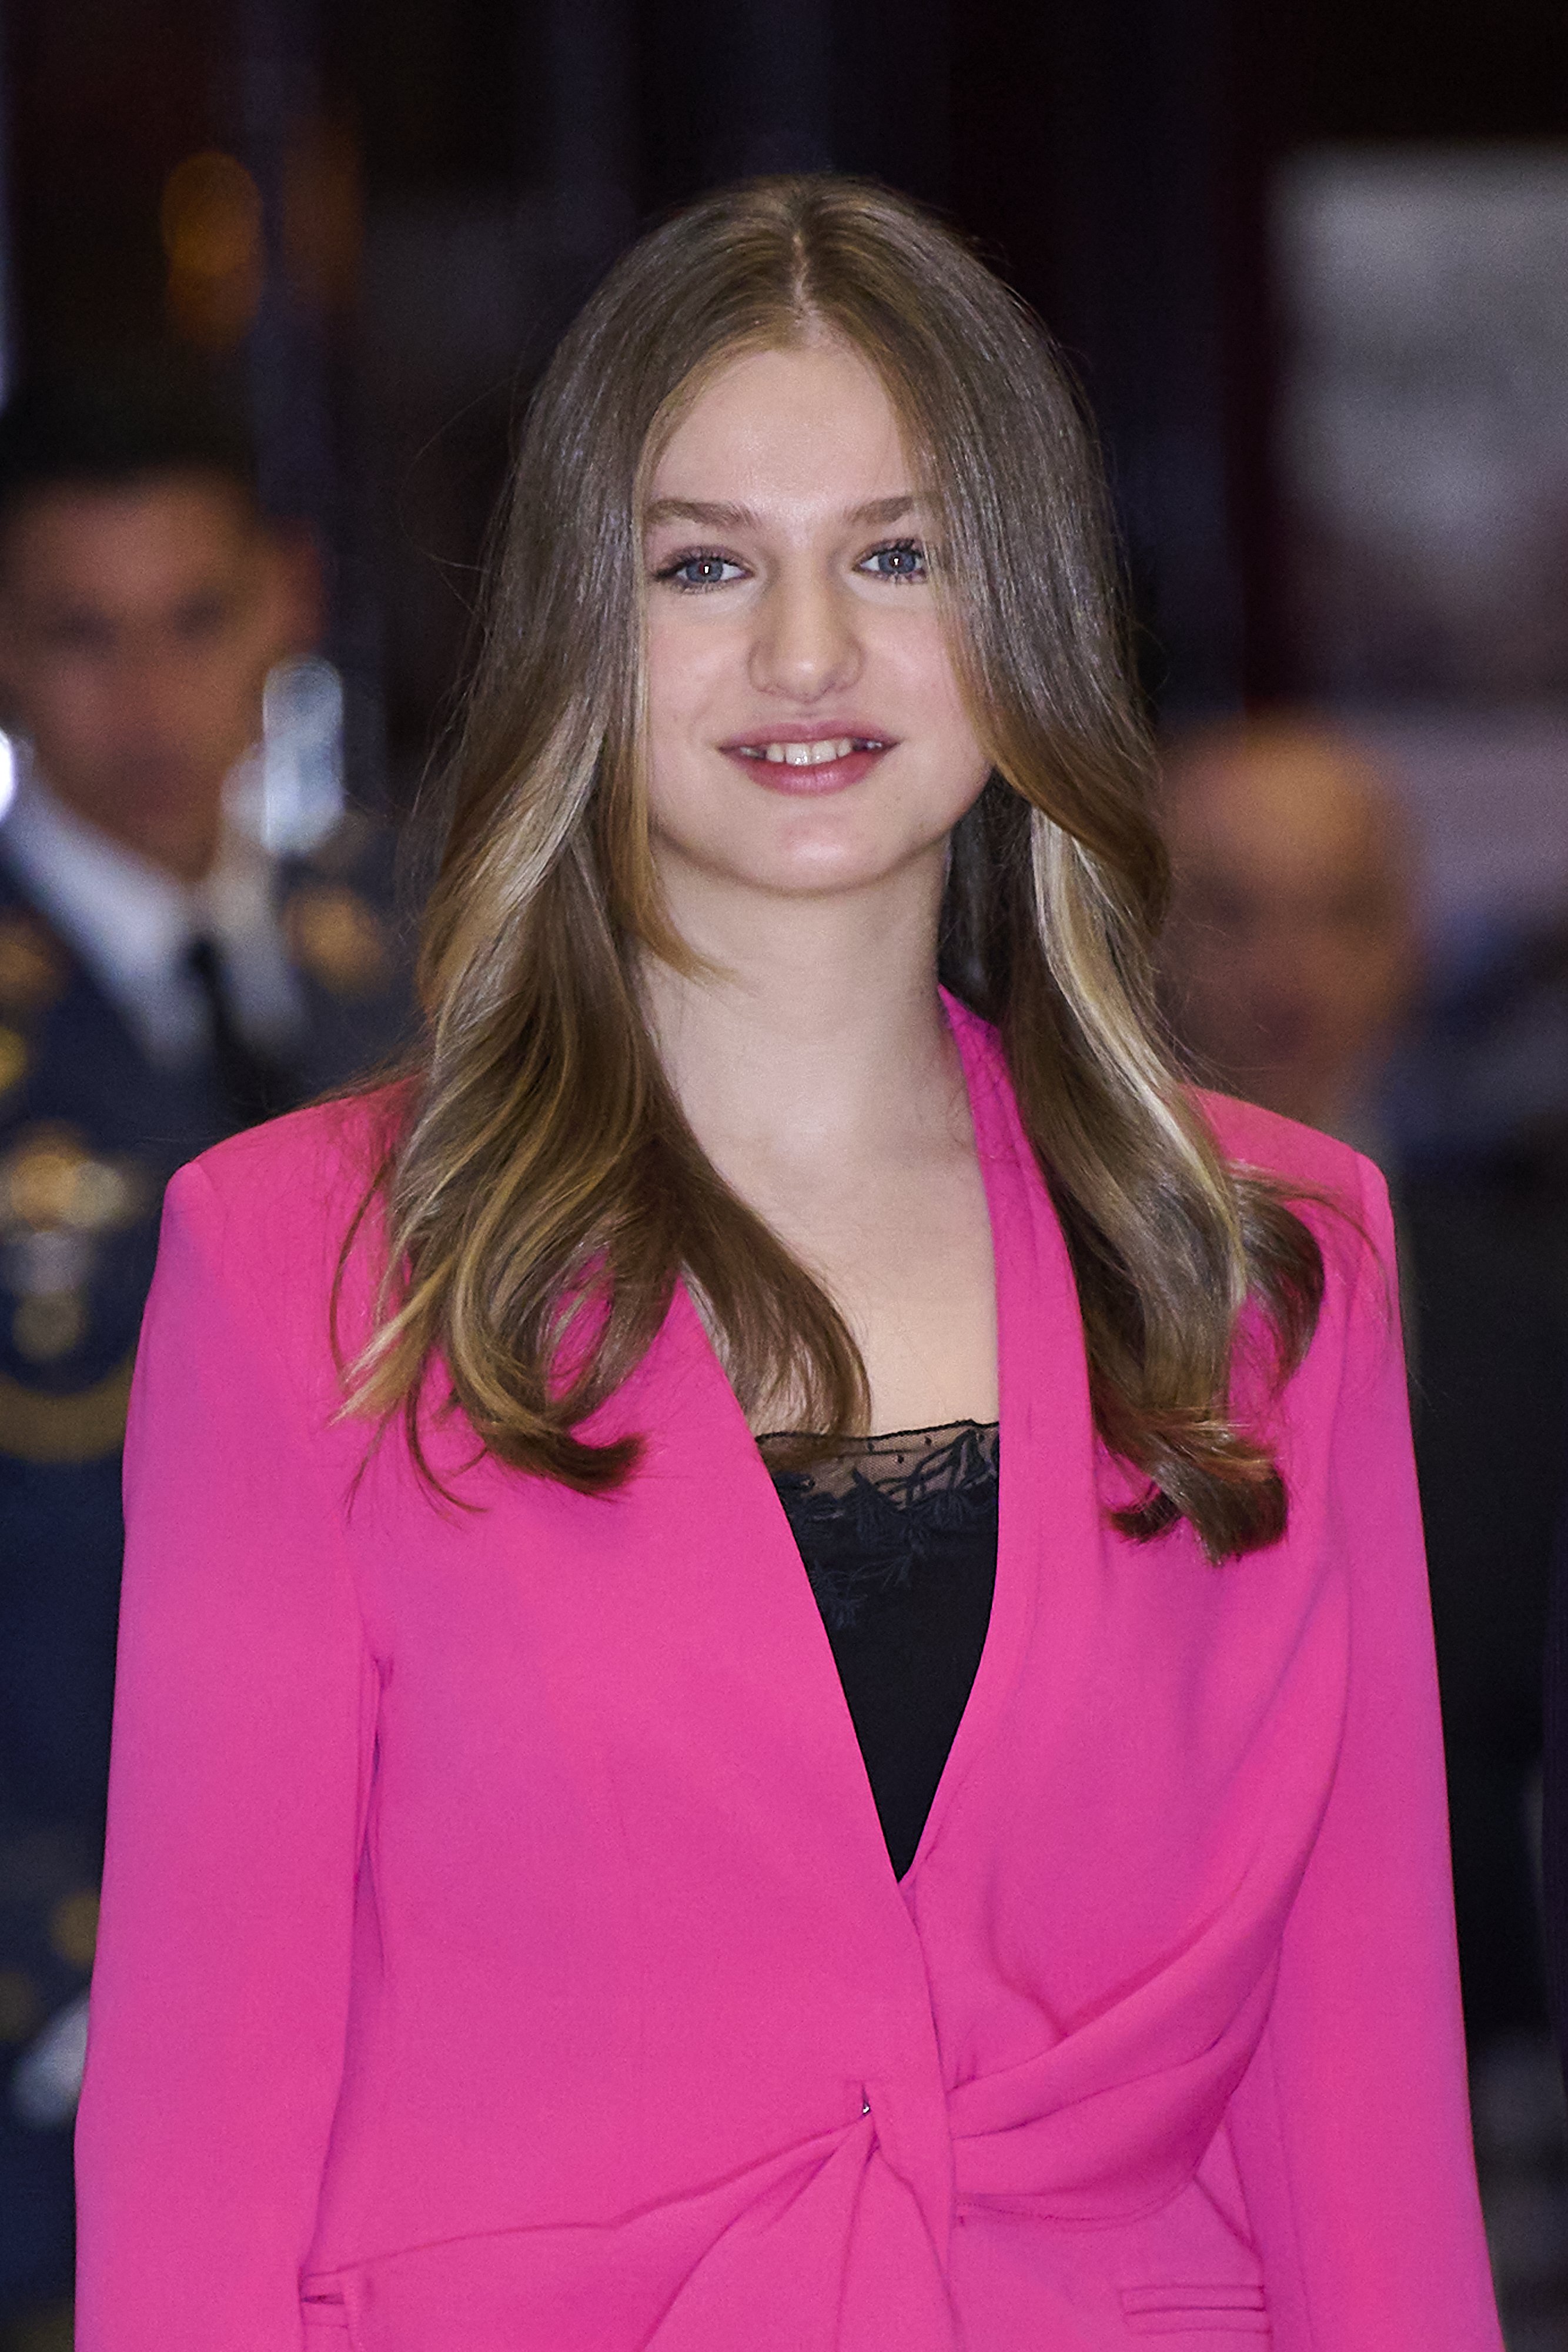 Crown Princess Leonor of Spain at a concert ahead of the "Princesa De Asturias" Awards on October 27, 2022, in Oviedo, Spain | Source: Getty Images